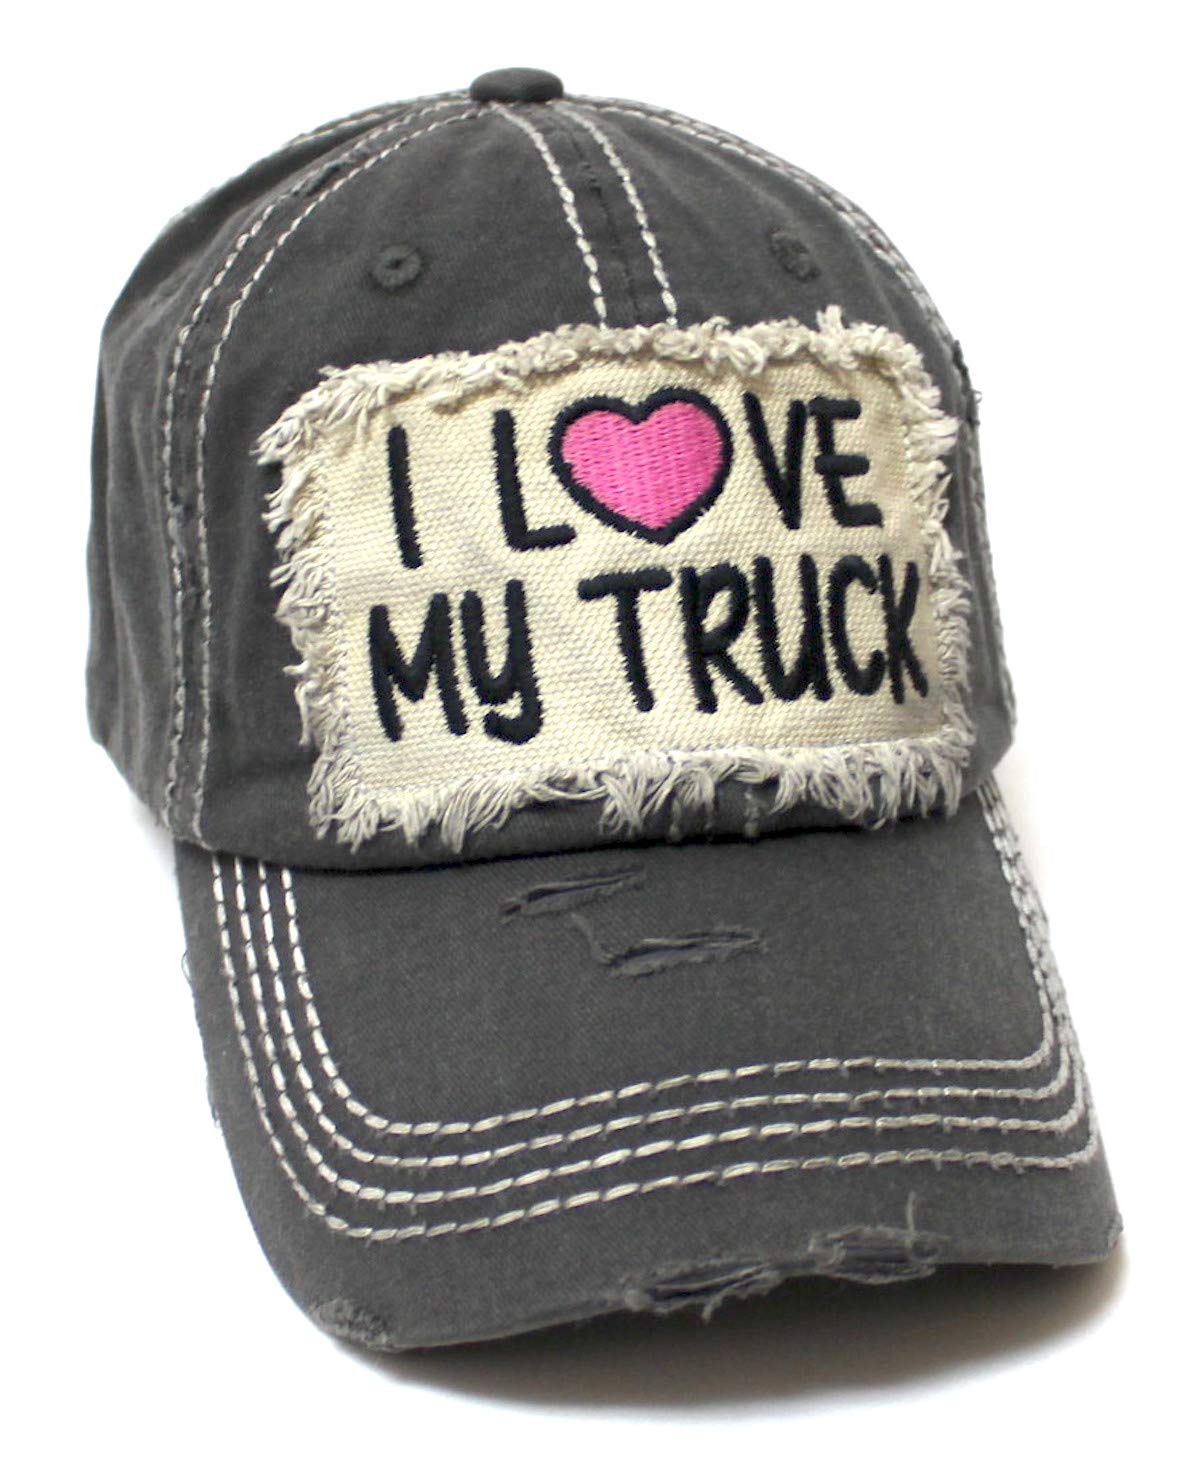 Women's Distressed Hat I Love My Truck Patch Embroidery Adjustable Cap, California Vintage Graphite - Caps 'N Vintage 